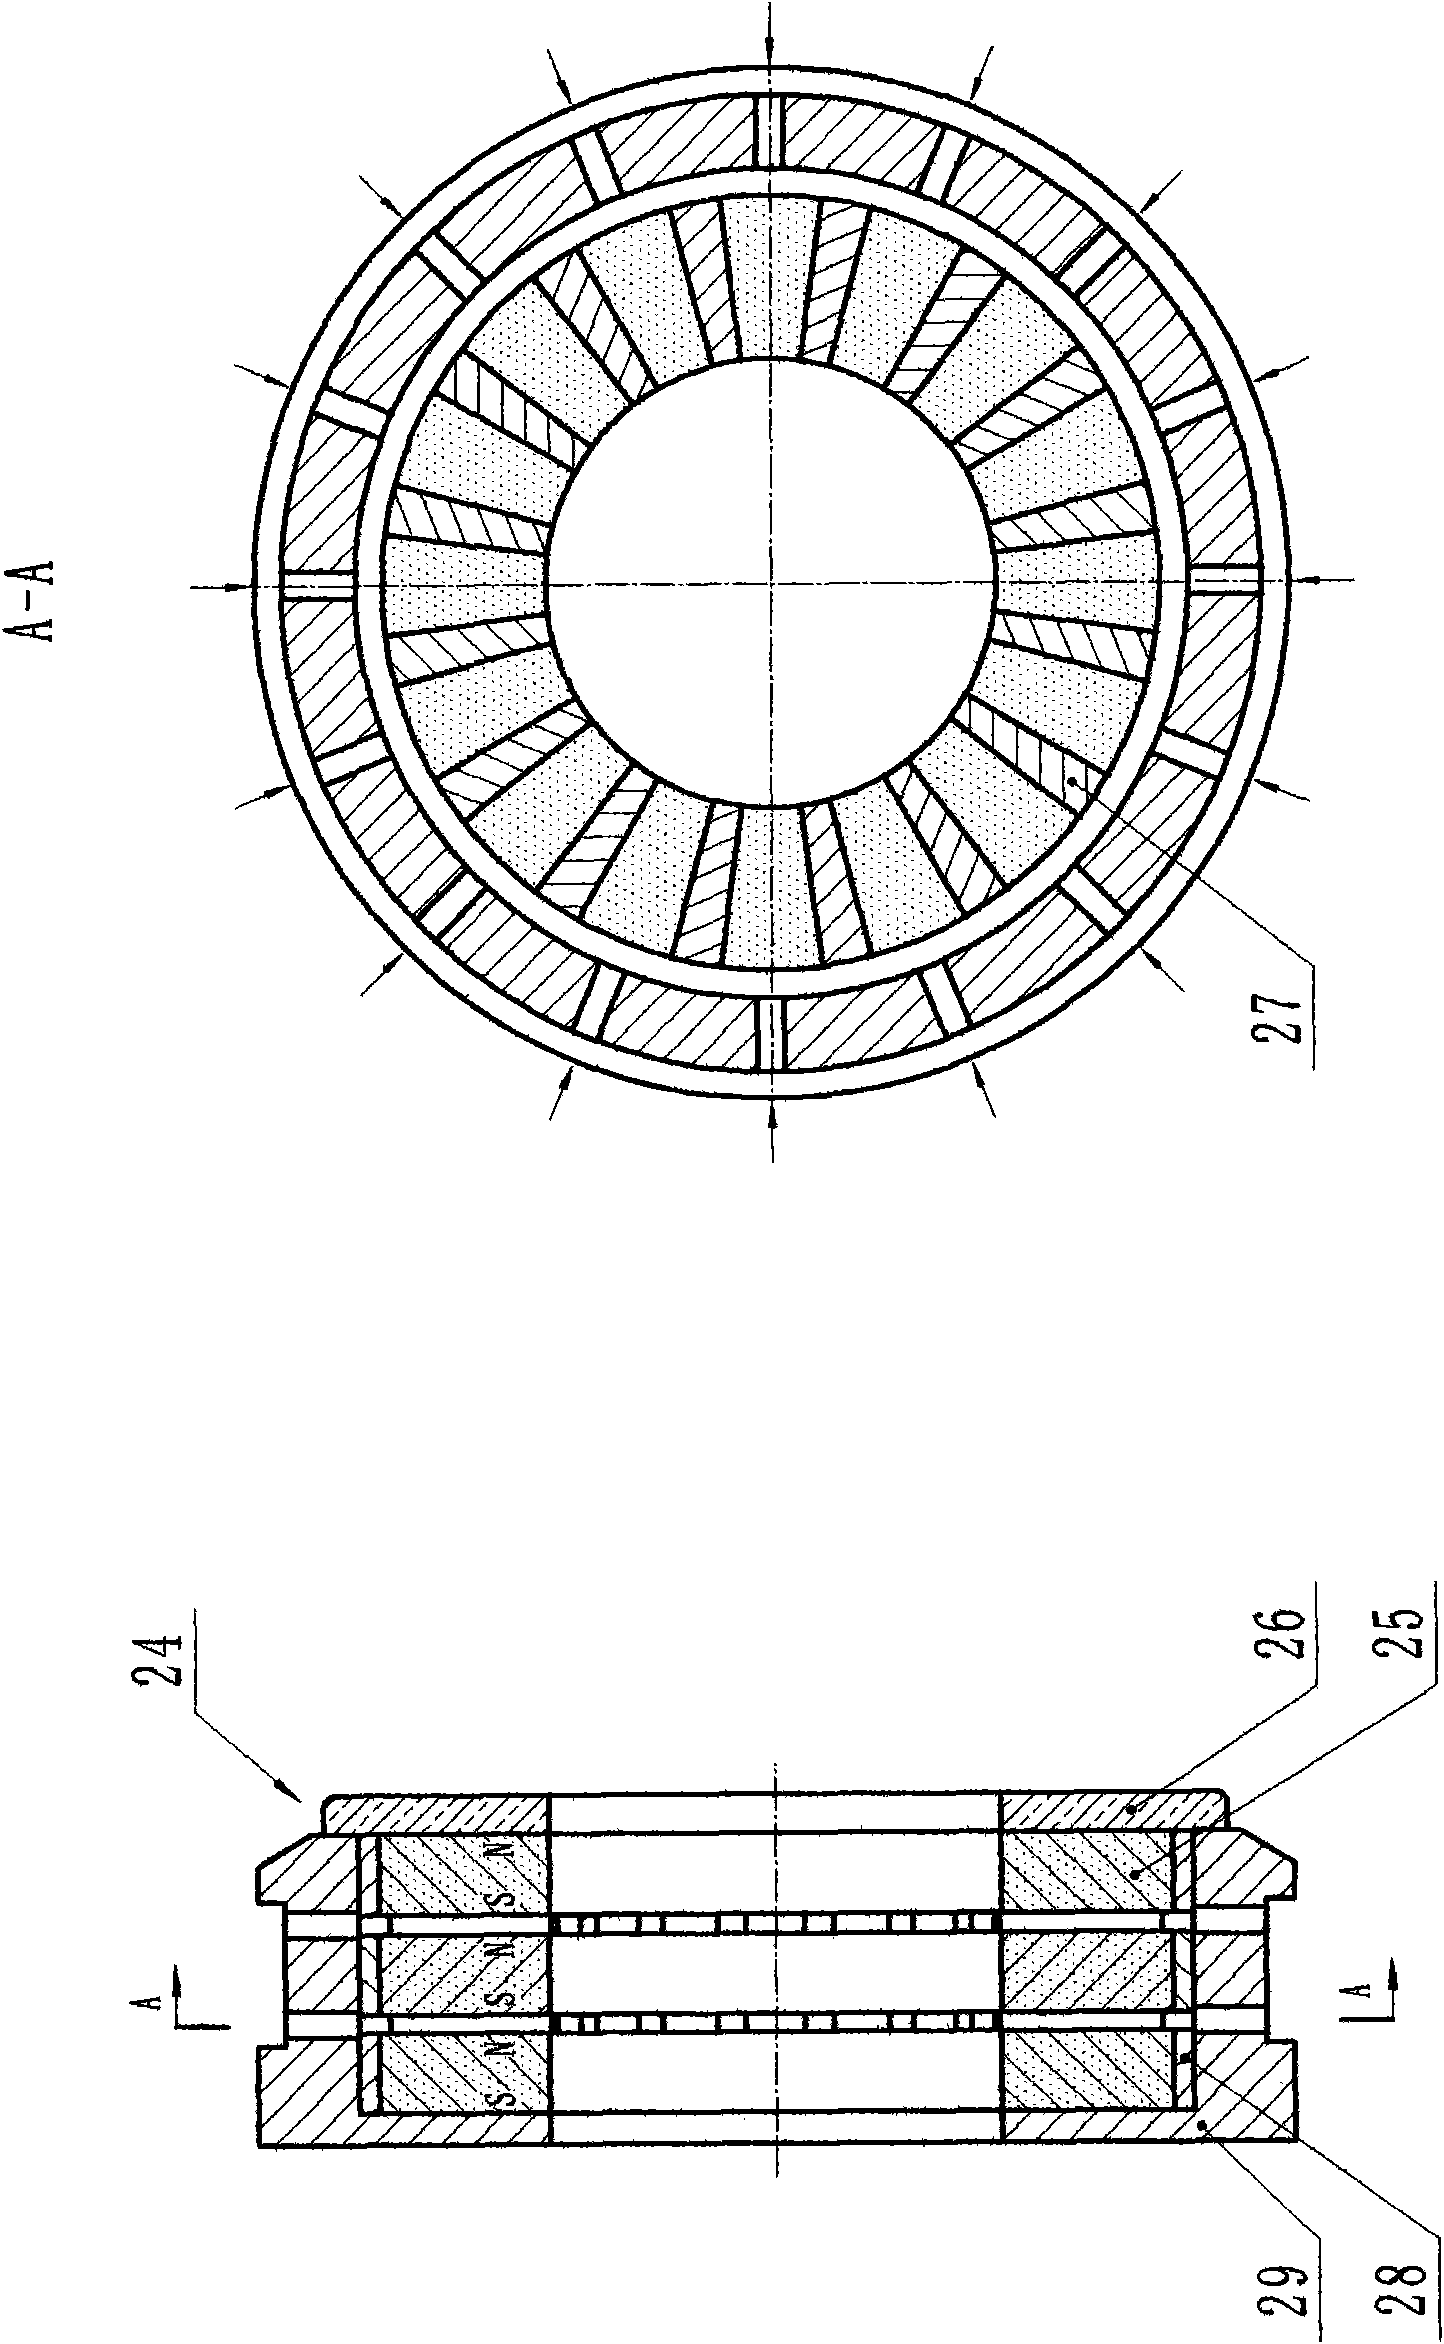 Standard magnetic suspension hybrid bearing-supported rotor and high-speed induction electrical rotating machine